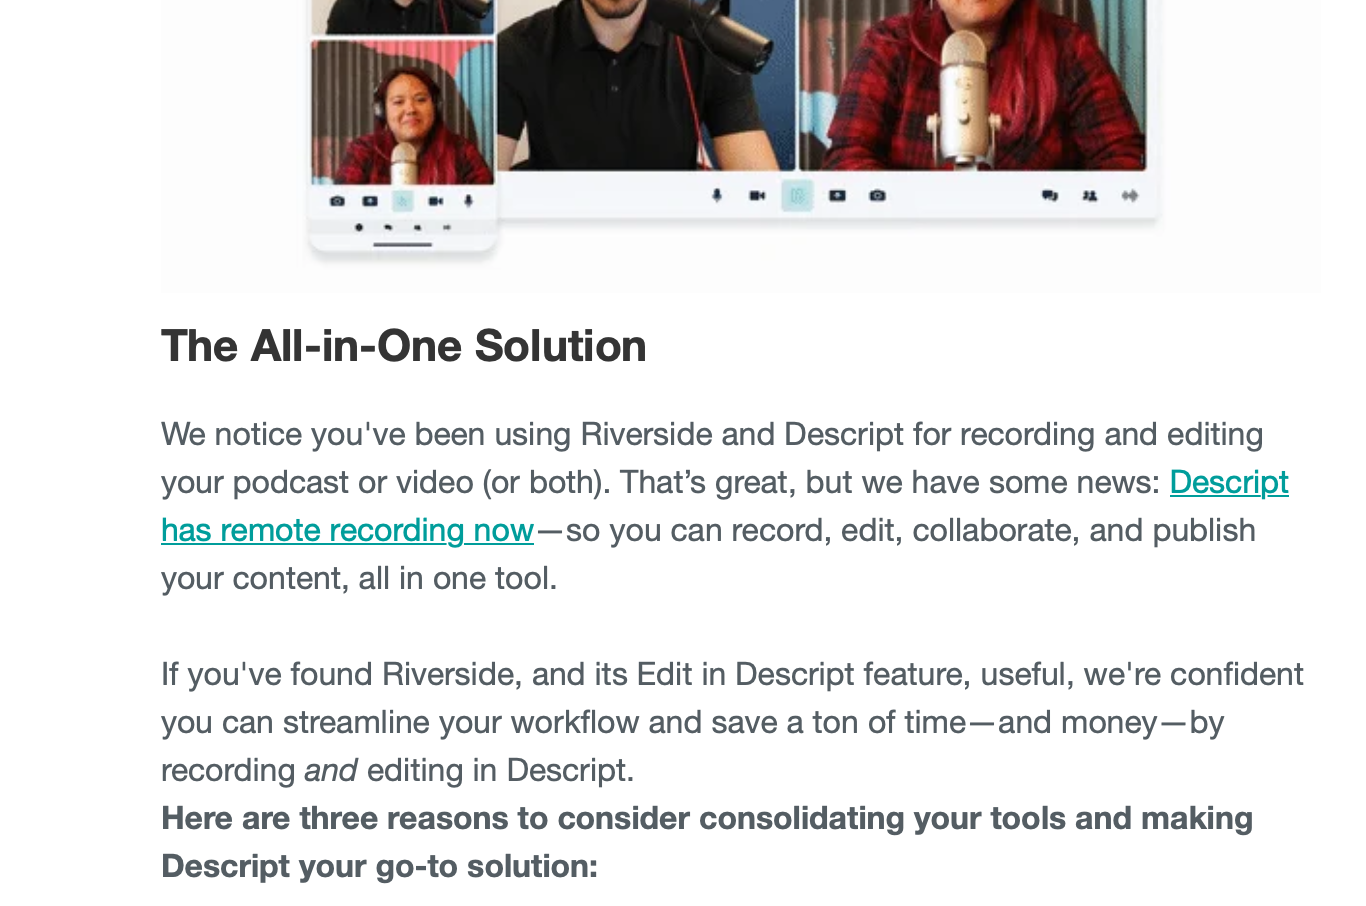 Email from Descript that reads: The All-in-One Solution&10;We notice you've been using Riverside and Descript for recording and editing your podcast or video (or both). That’s great, but we have some news: Descript has remote recording now—so you can record, edit, collaborate, and publish your content, all in one tool. &10;&10;If you've found Riverside, and its Edit in Descript feature, useful, we're confident you can streamline your workflow and save a ton of time—and money—by recording and editing in Descript.